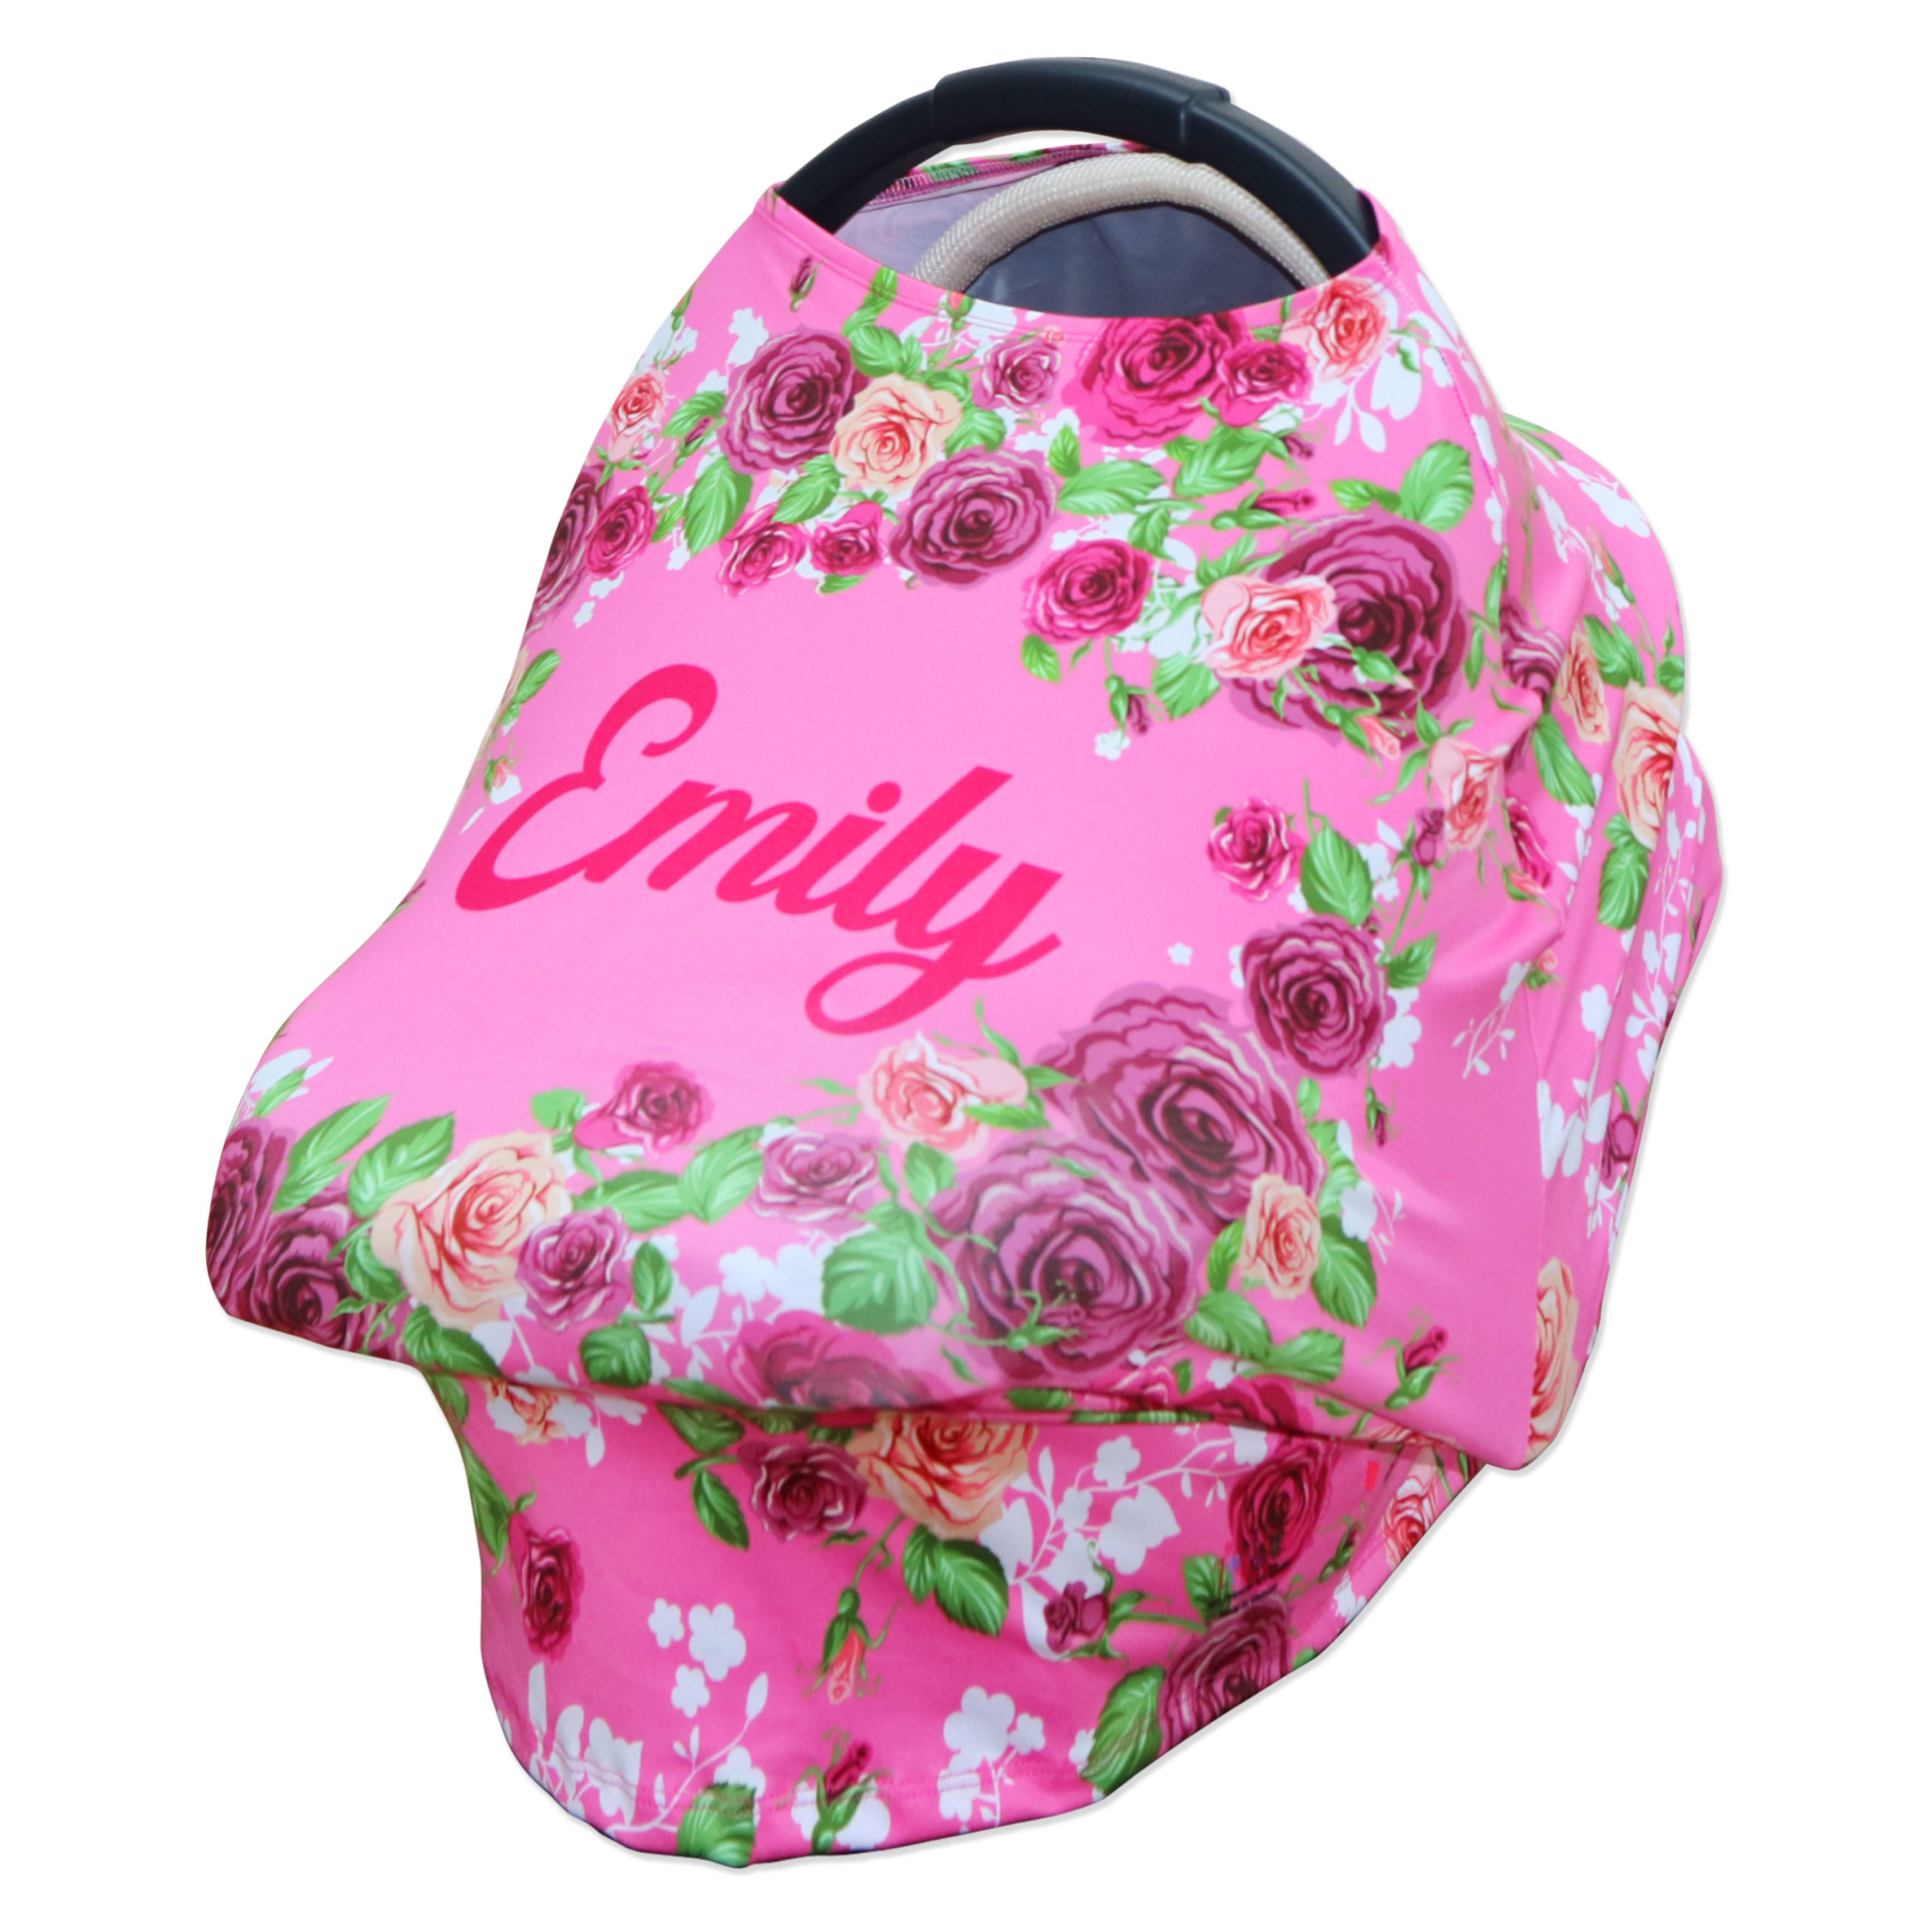 Personalized Baby Girl Name Floral Pink Fitted Car Seat Cover